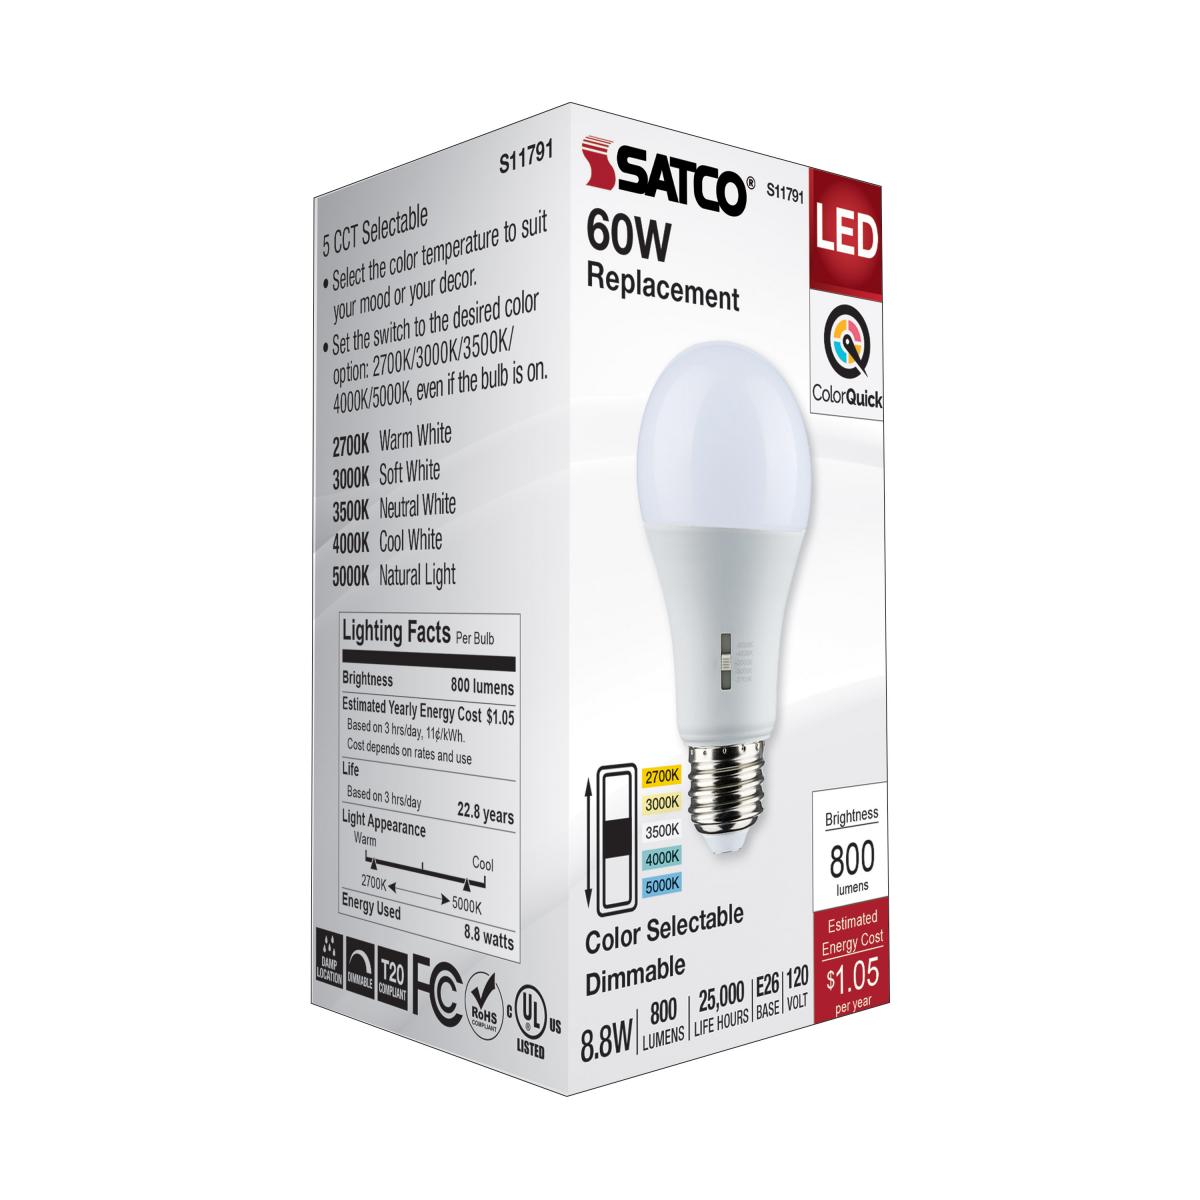 A19 LED Bulb, 60W Equivalent, 9 Watt, 800 Lumens, Selectable CCT 2700K to 5000K, E26 Medium Base, Frosted Finish - Bees Lighting